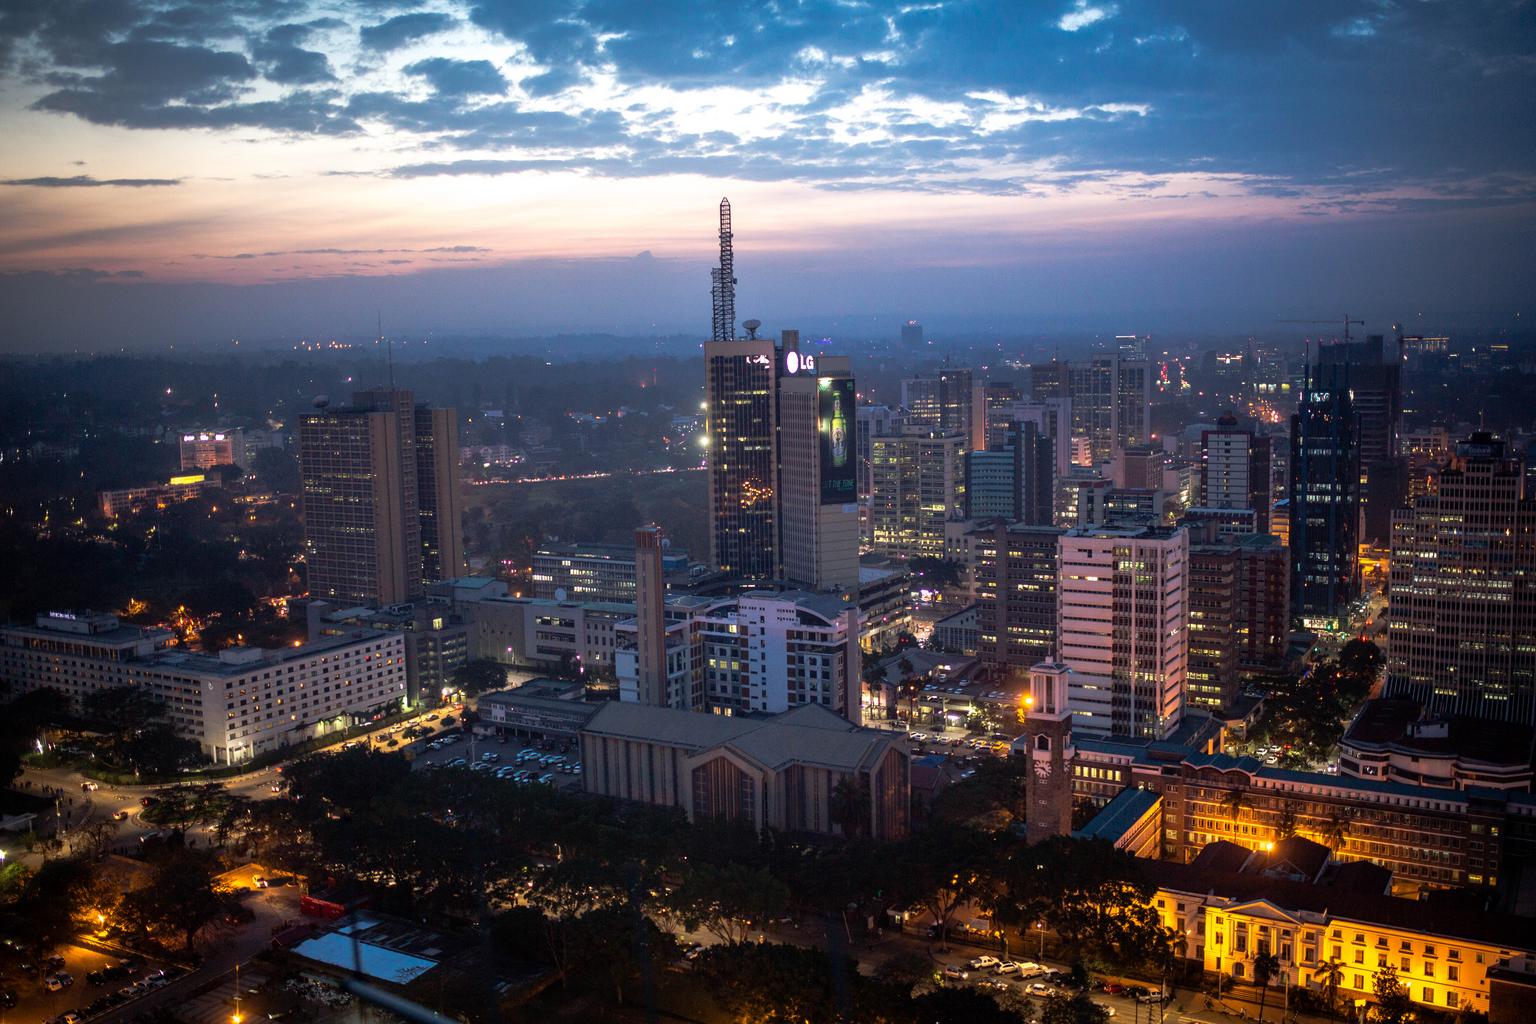 Arrive in Nairobi and Check-in to the Movenpick Hotel & Residences